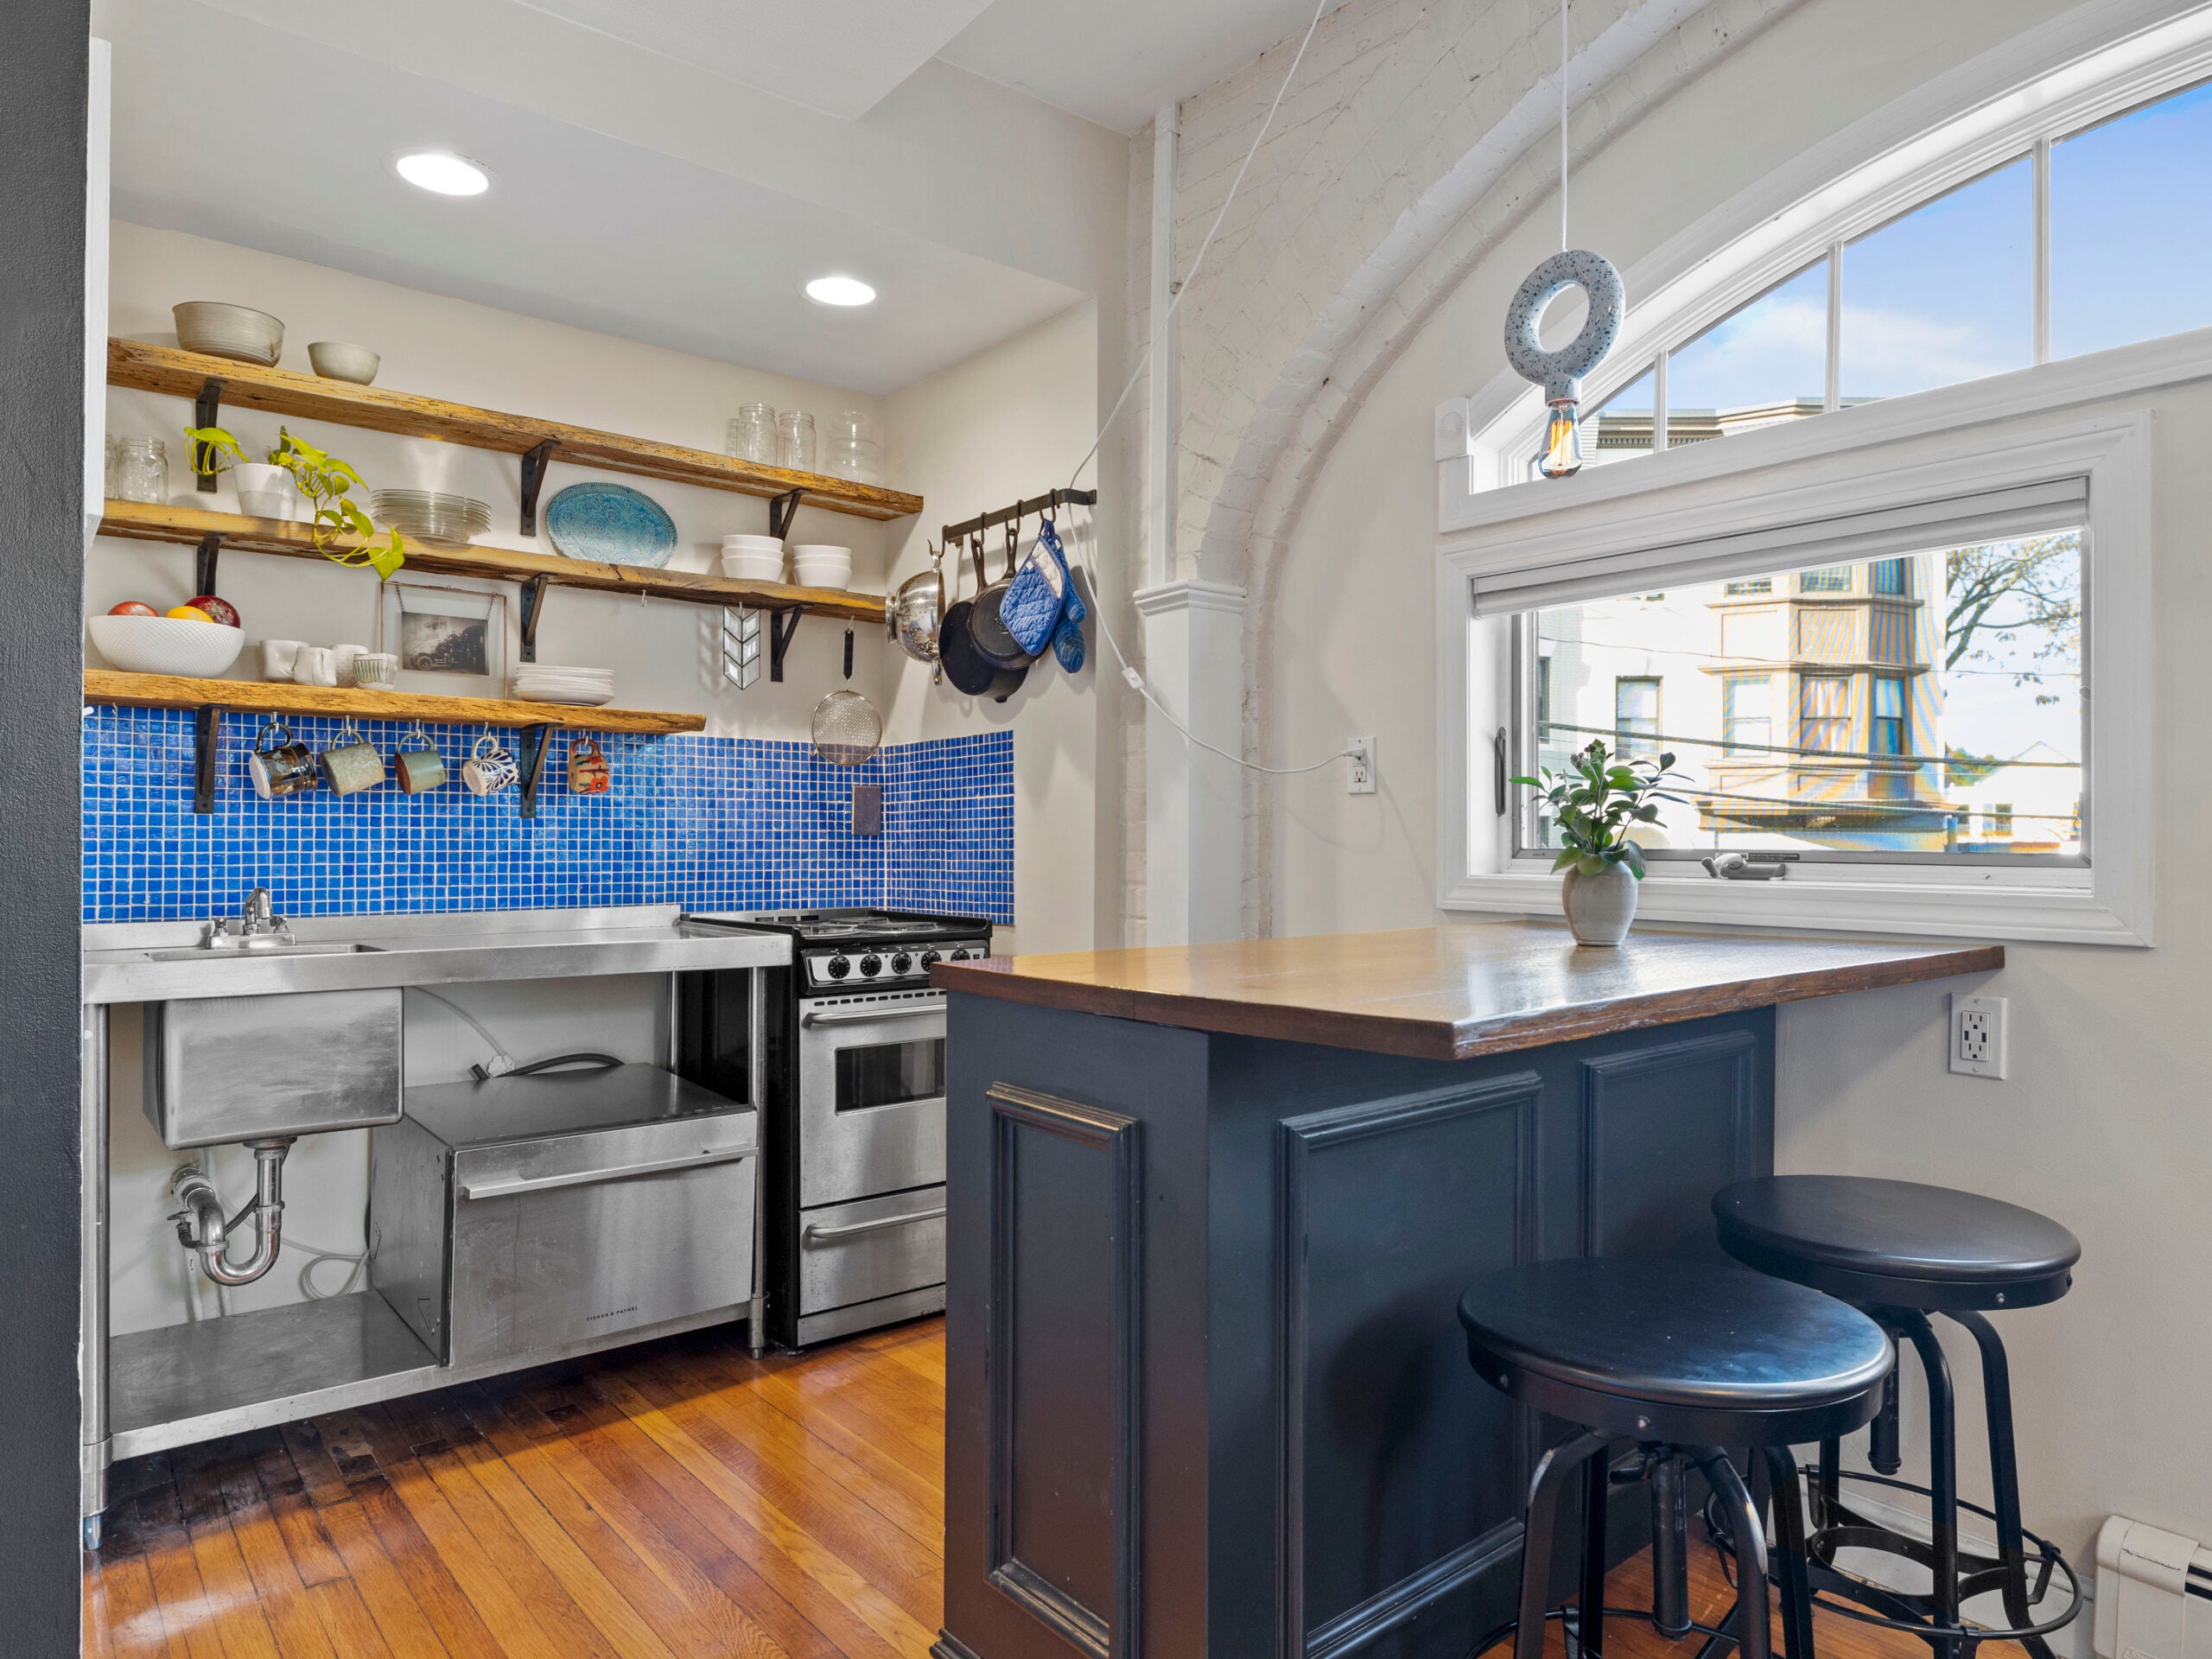 A kitchen with a bright blue mosaic backsplash, open shelving, exposed brick, and a peninsula with seating for two.